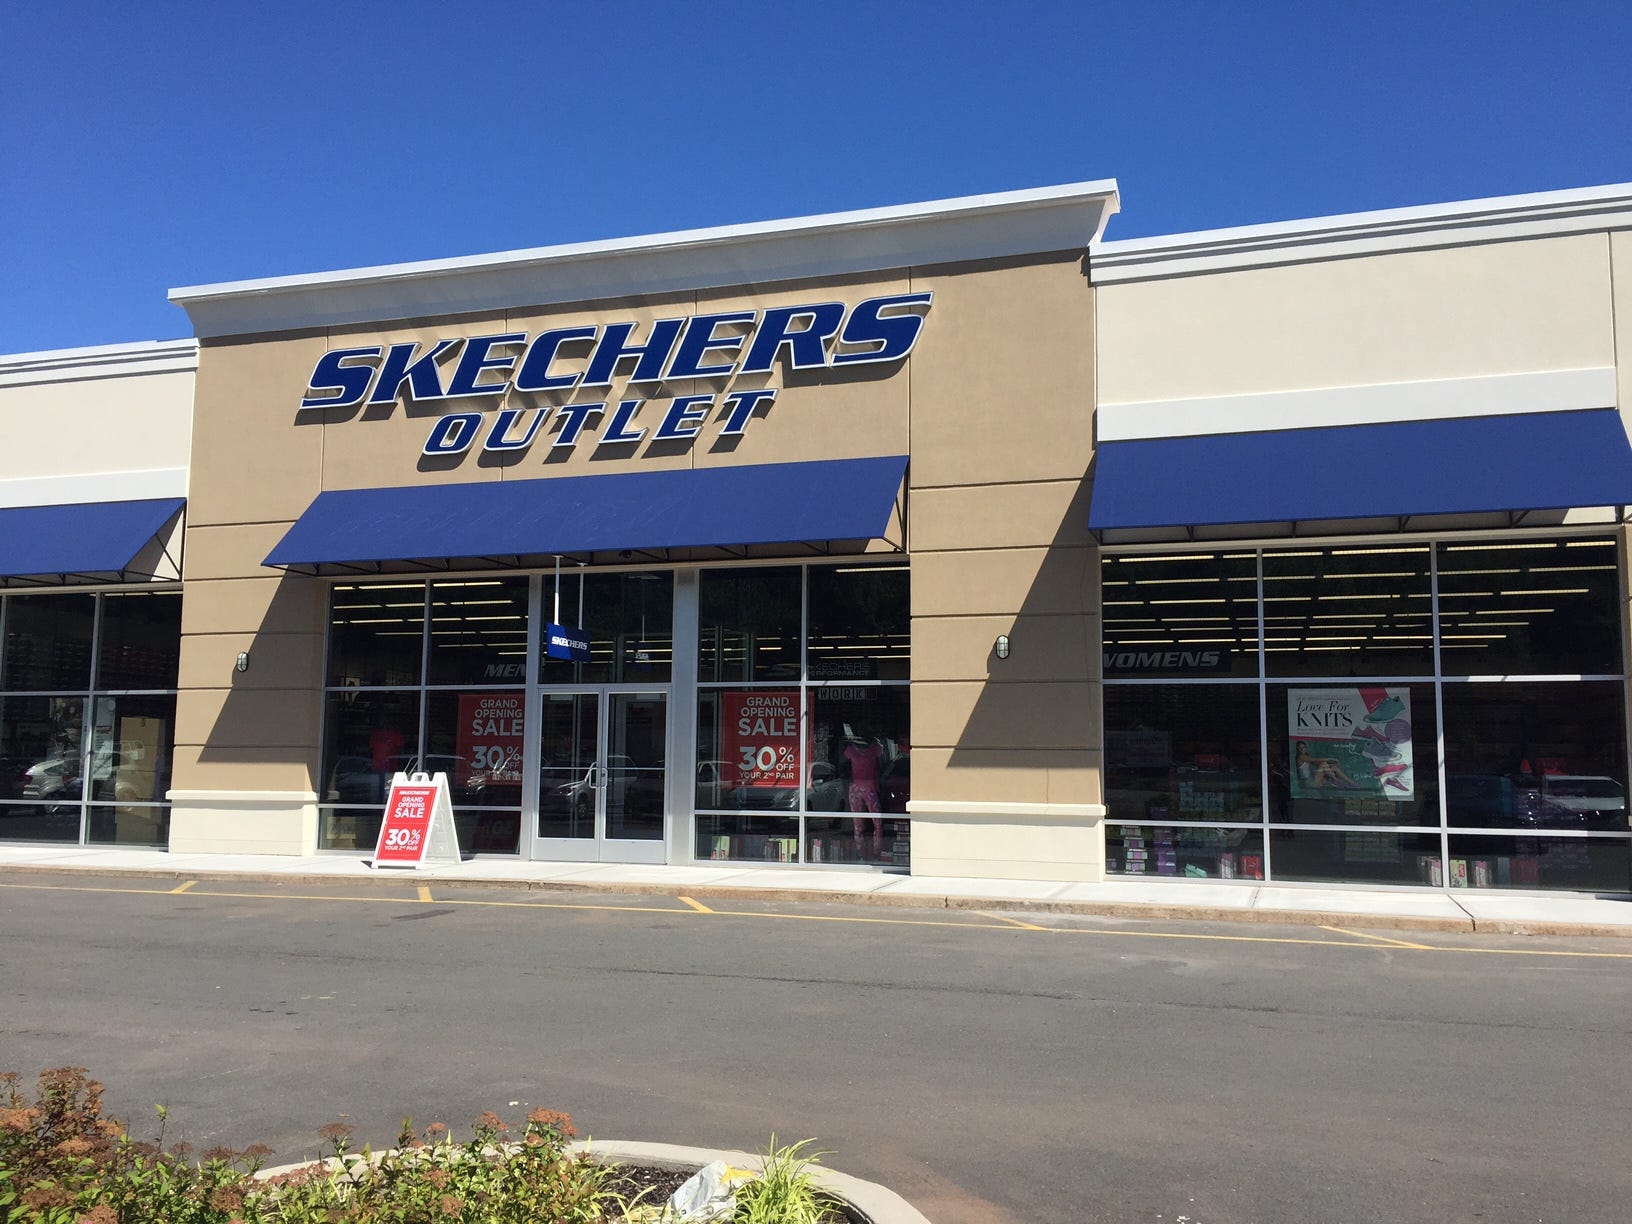 Skechers Outlet opens in North Brunswick